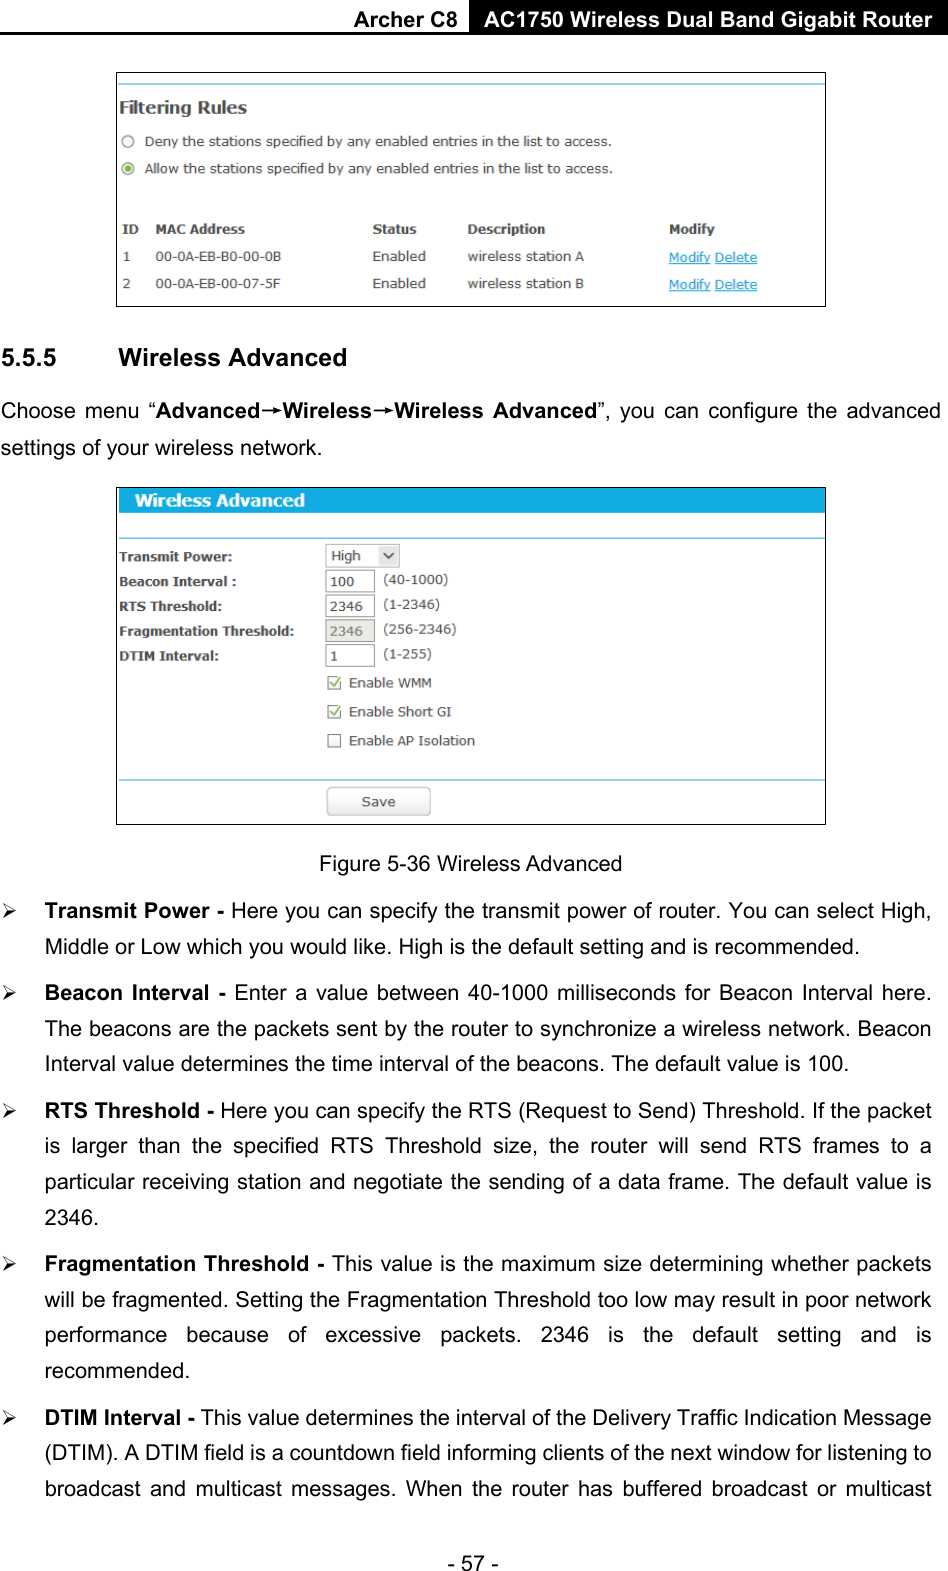 Archer C8 AC1750 Wireless Dual Band Gigabit Router  - 57 -  5.5.5 Wireless Advanced Choose menu “Advanced→Wireless→Wireless  Advanced”, you can configure the advanced settings of your wireless network.  Figure 5-36 Wireless Advanced  Transmit Power - Here you can specify the transmit power of router. You can select High, Middle or Low which you would like. High is the default setting and is recommended.  Beacon Interval -  Enter a value between 40-1000 milliseconds for Beacon Interval here. The beacons are the packets sent by the router to synchronize a wireless network. Beacon Interval value determines the time interval of the beacons. The default value is 100.    RTS Threshold - Here you can specify the RTS (Request to Send) Threshold. If the packet is larger than the specified RTS Threshold size, the router will send RTS frames to a particular receiving station and negotiate the sending of a data frame. The default value is 2346.    Fragmentation Threshold - This value is the maximum size determining whether packets will be fragmented. Setting the Fragmentation Threshold too low may result in poor network performance because of excessive packets. 2346 is the default setting and is recommended.    DTIM Interval - This value determines the interval of the Delivery Traffic Indication Message (DTIM). A DTIM field is a countdown field informing clients of the next window for listening to broadcast and multicast messages. When the router has buffered broadcast or multicast 